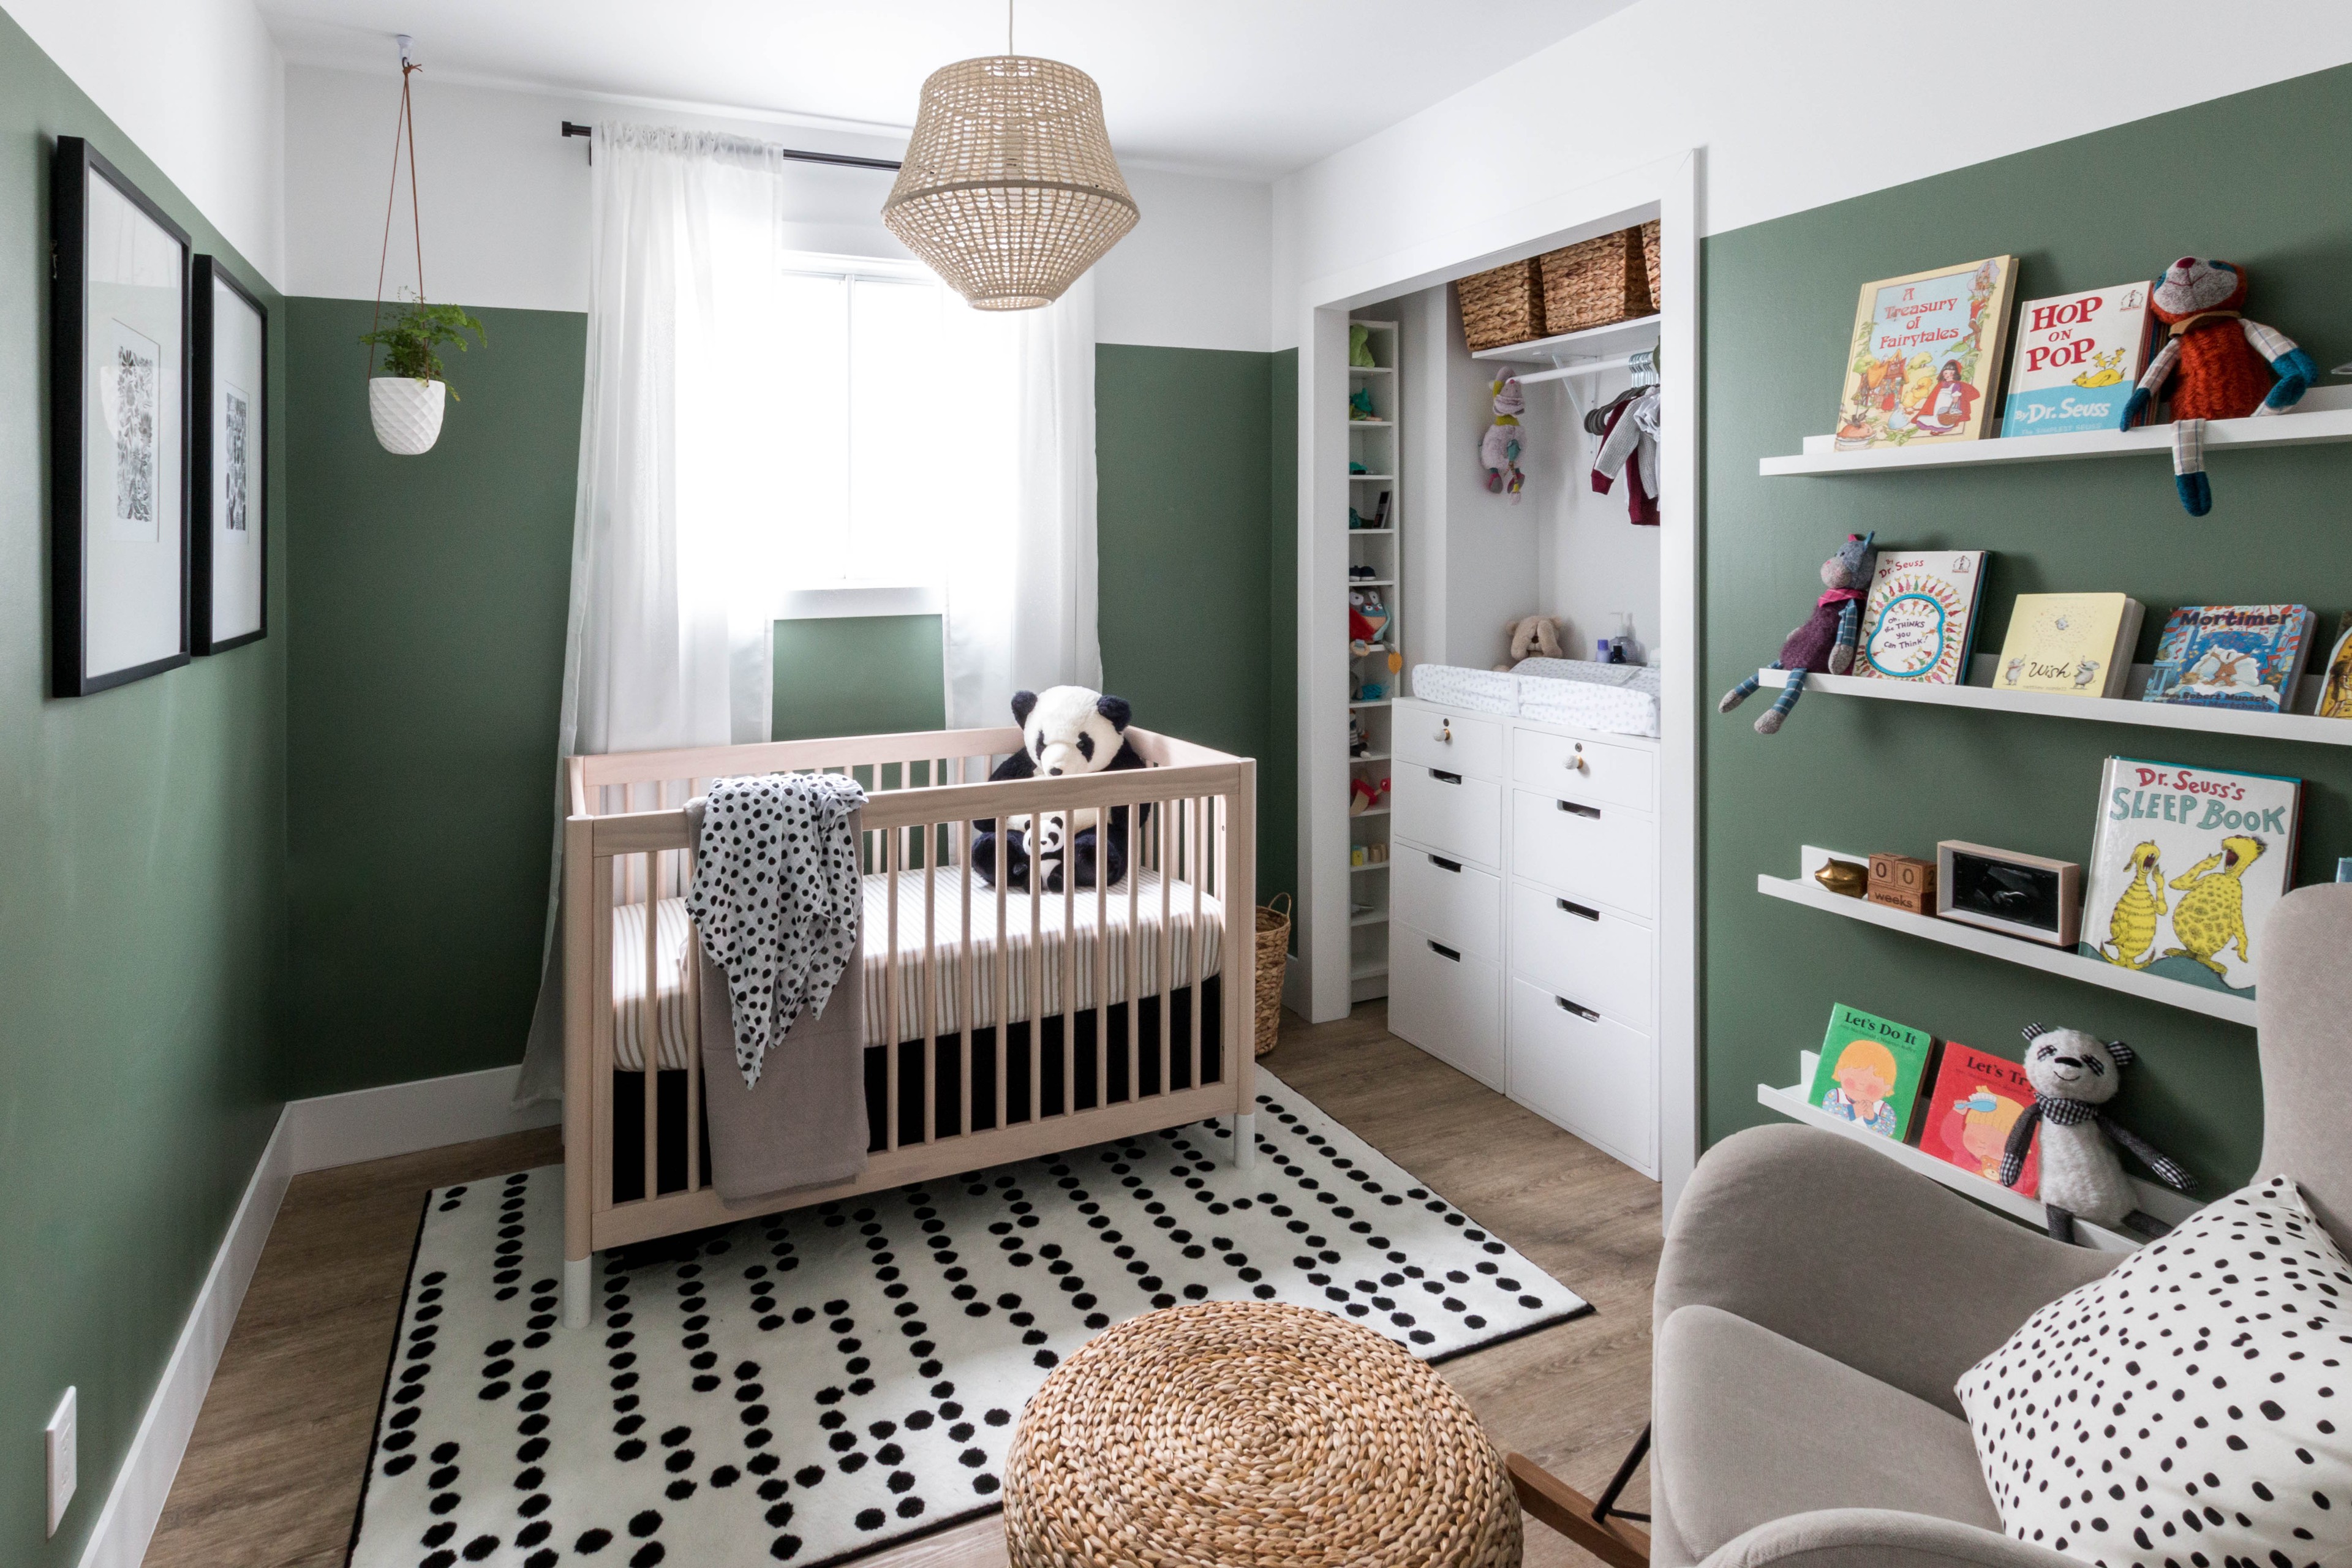 75 Nursery with Green Walls Ideas You'll Love - February, 2023 | Houzz